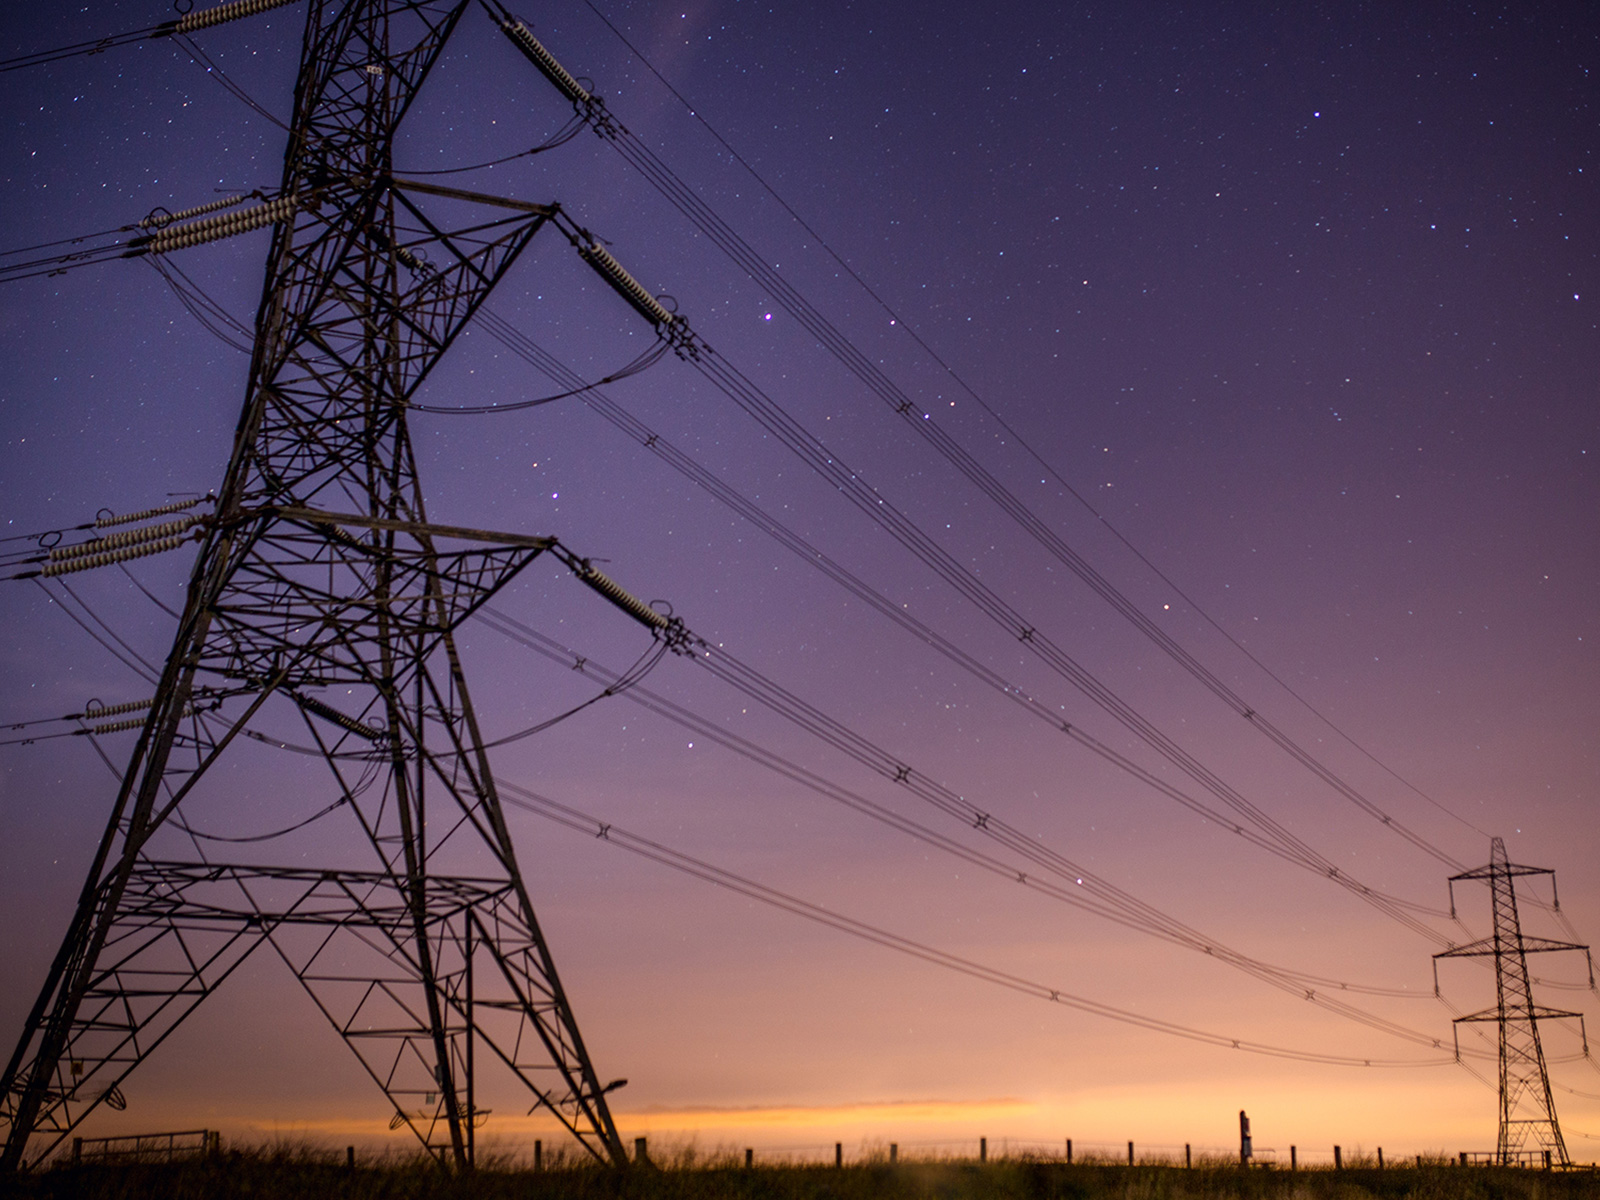 Transmission towers at dusk